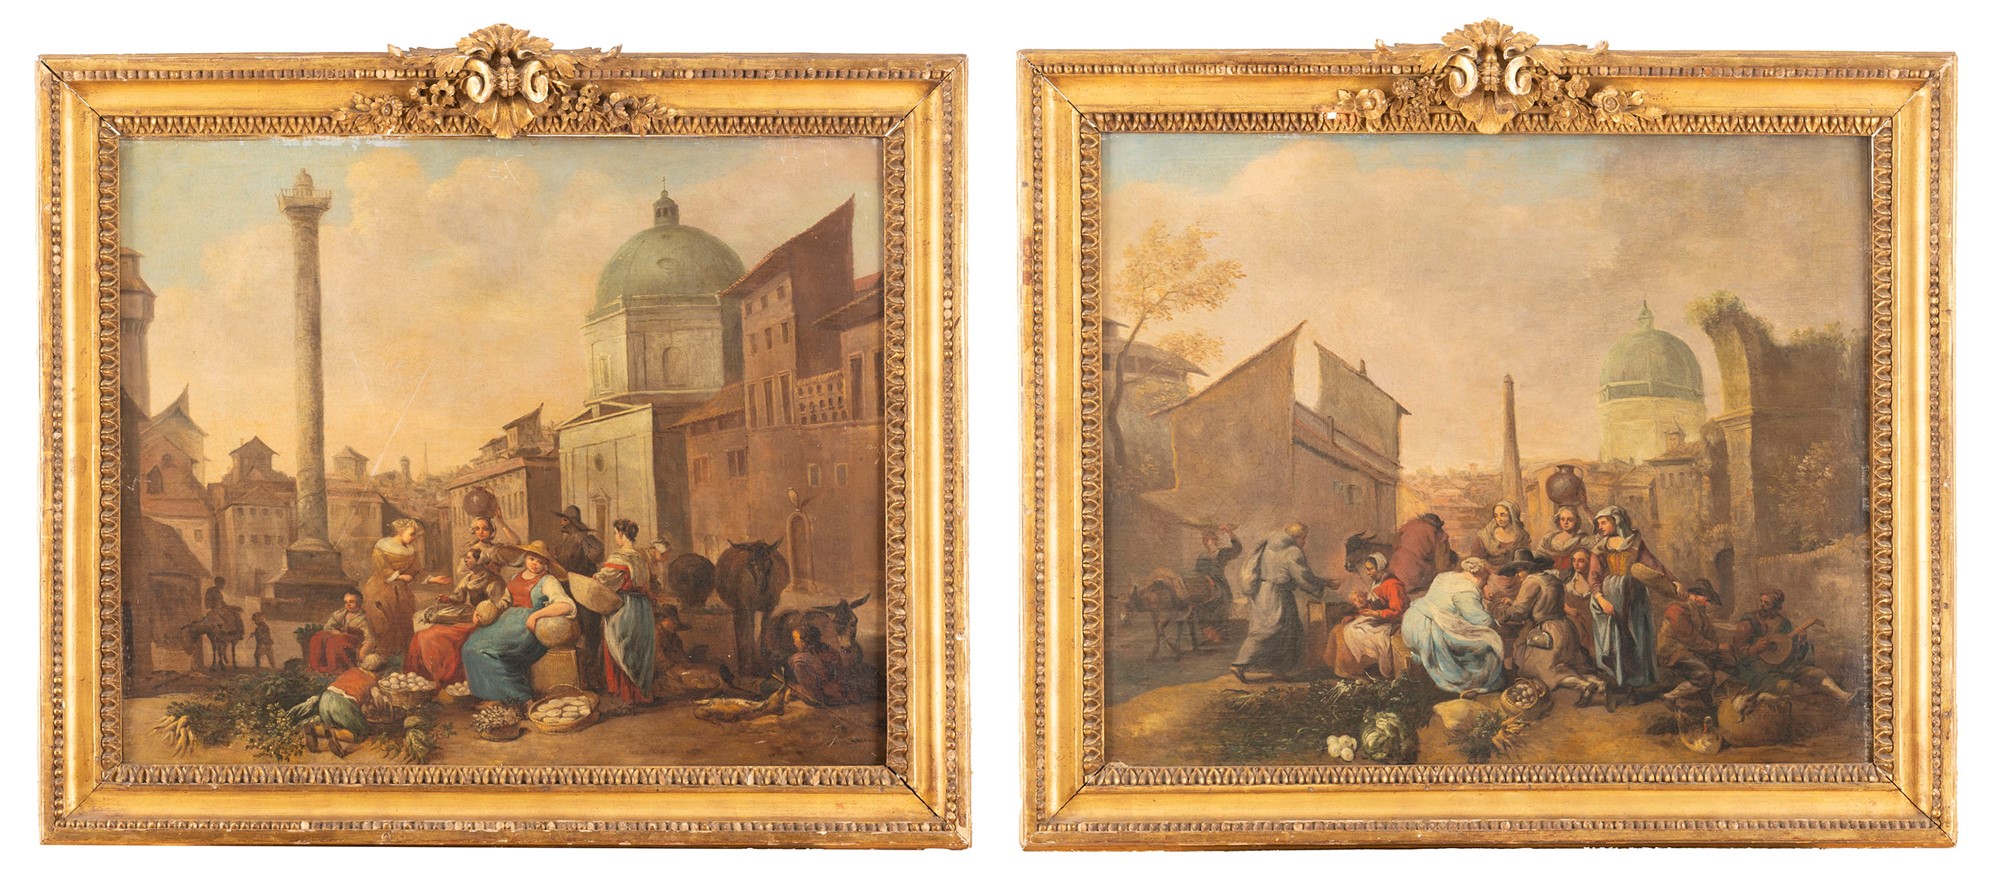 Circle of Hendrick Mommers (1623 - 1693) - Two market scenes with views of Rome in the background